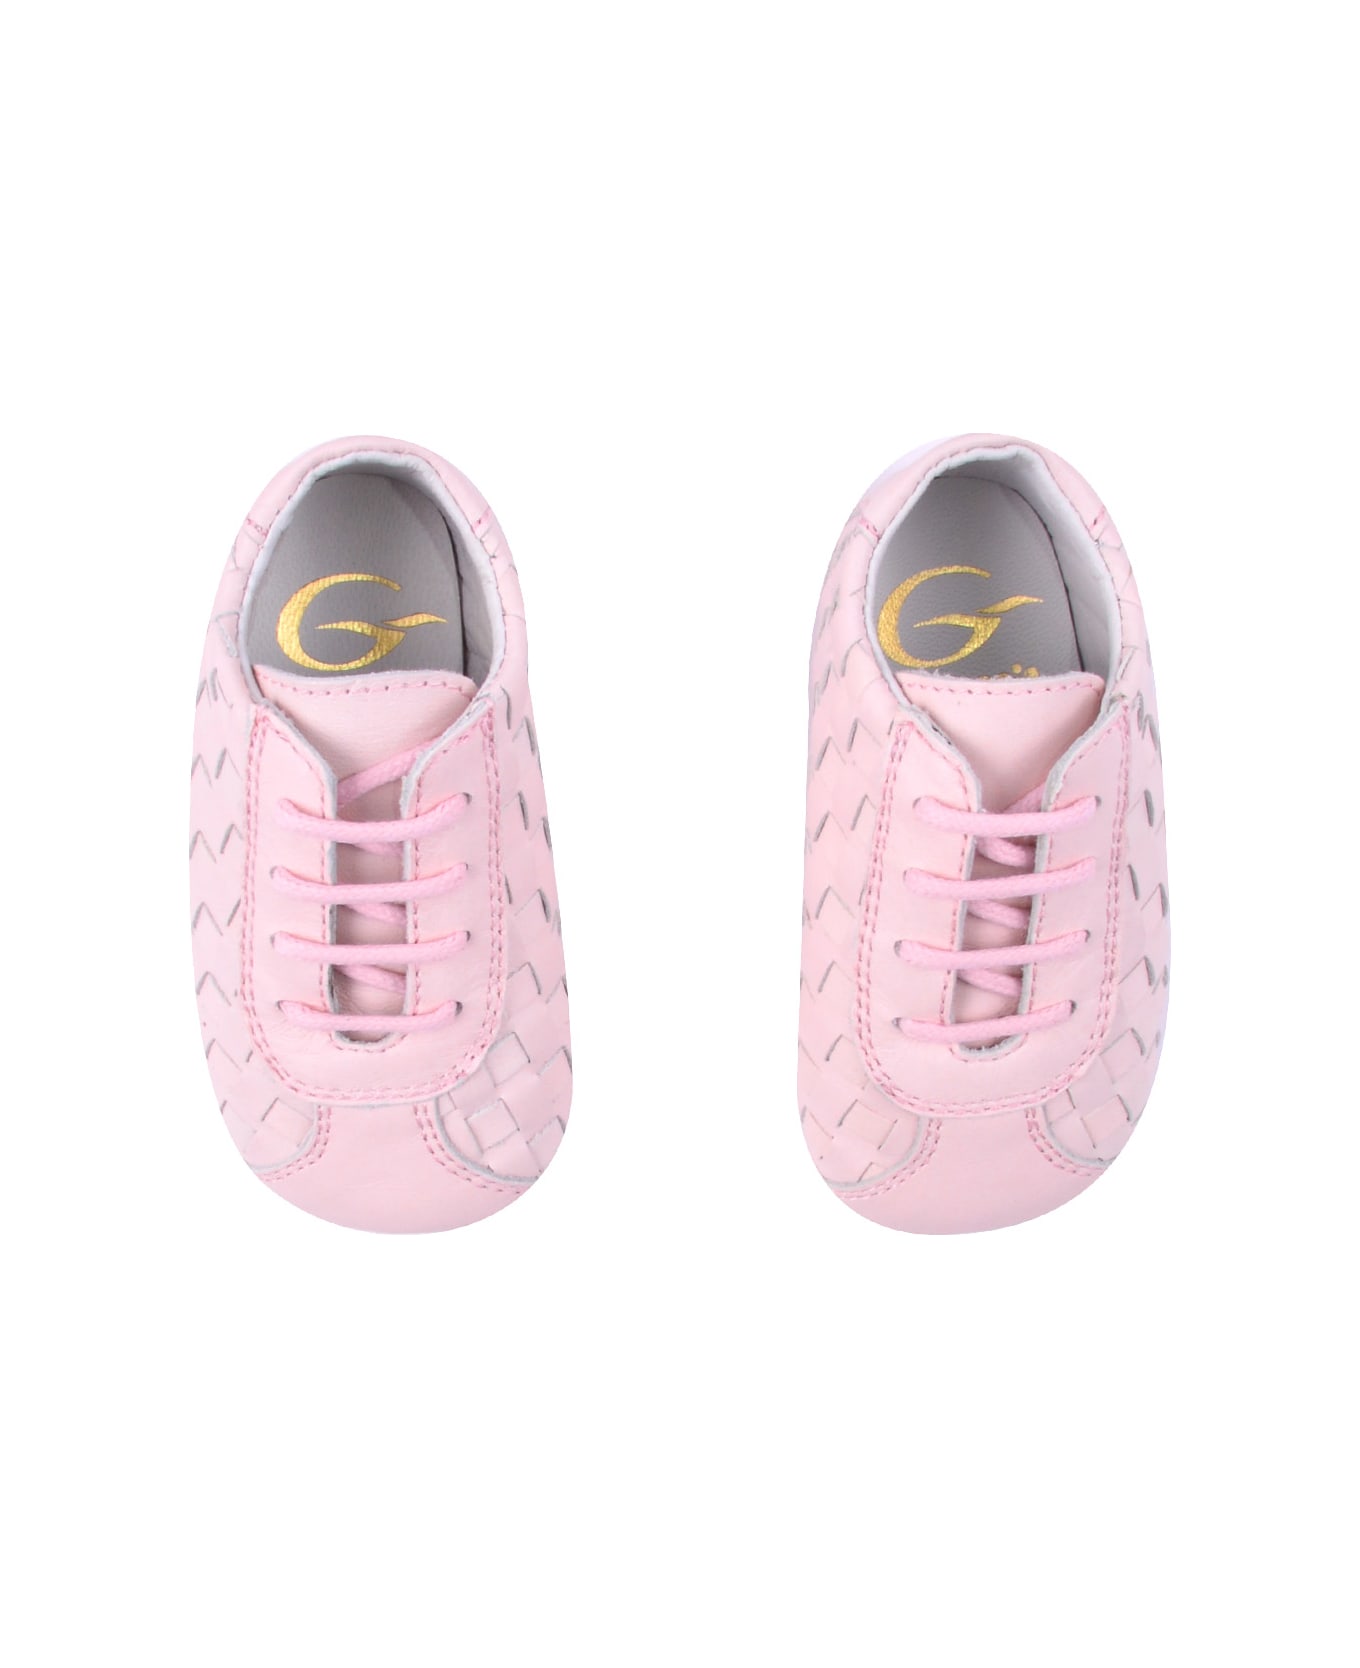 Gallucci Leather Lace-up Shoes With Woven Effect - Rose